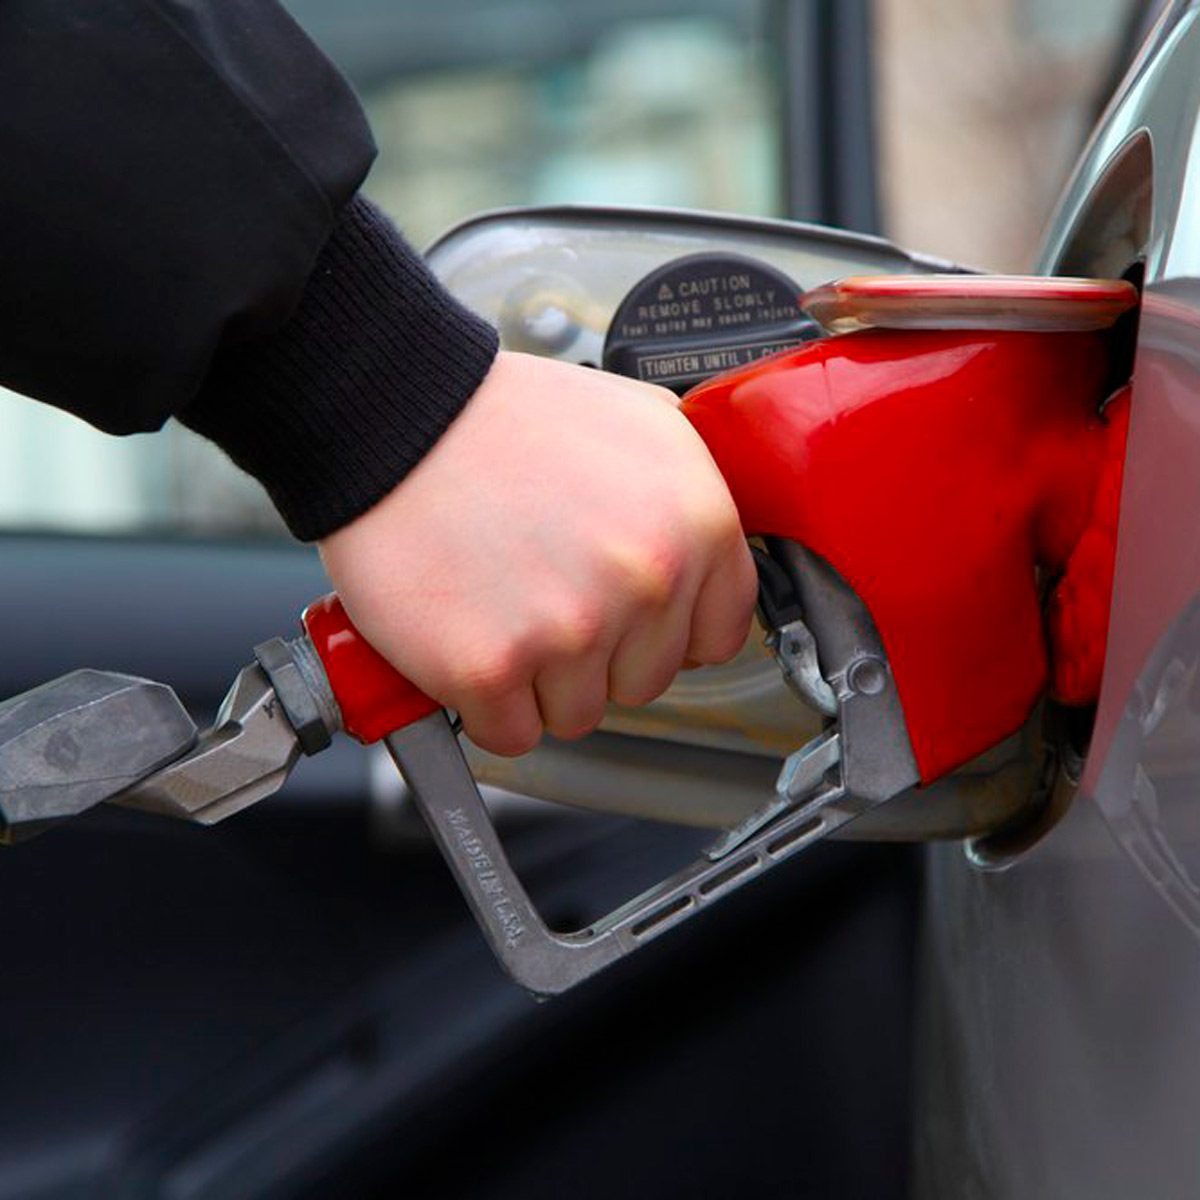 Bad Gas Pump Habits That Cost You Hundreds Each Year